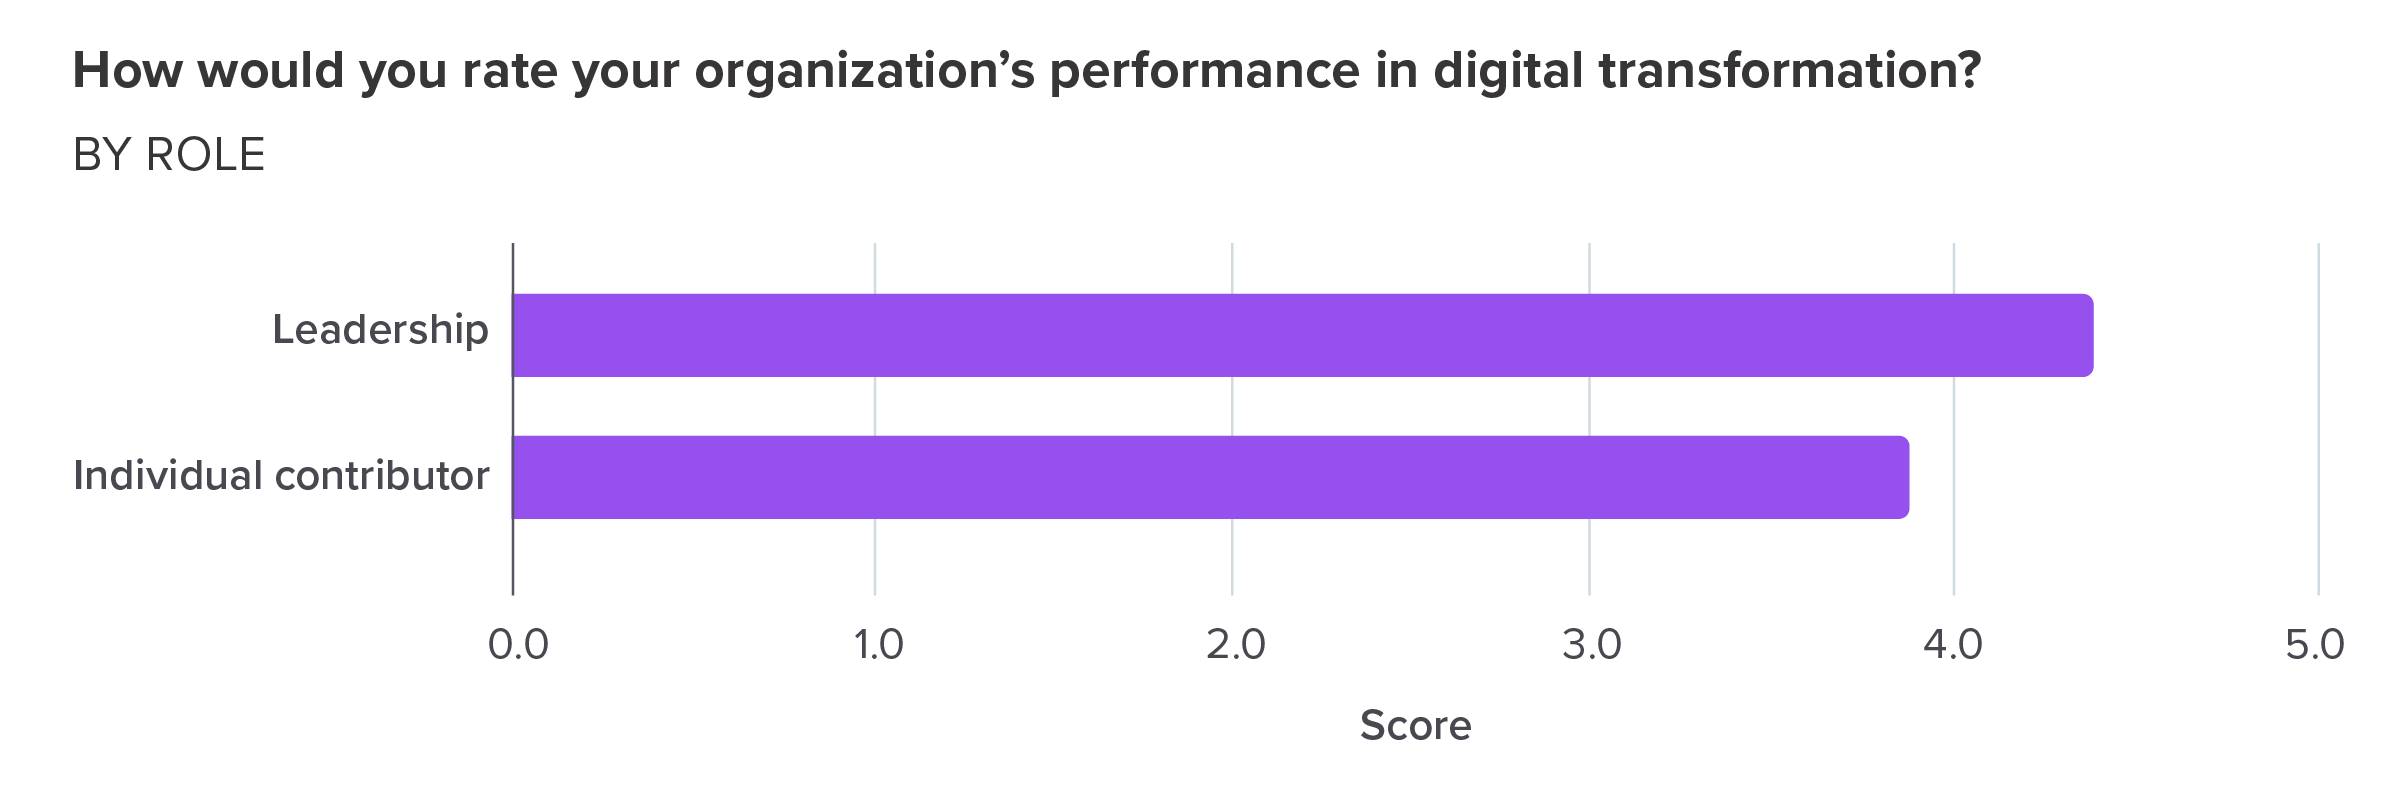 How would you rate your organization’s performance in digital transformation? By role